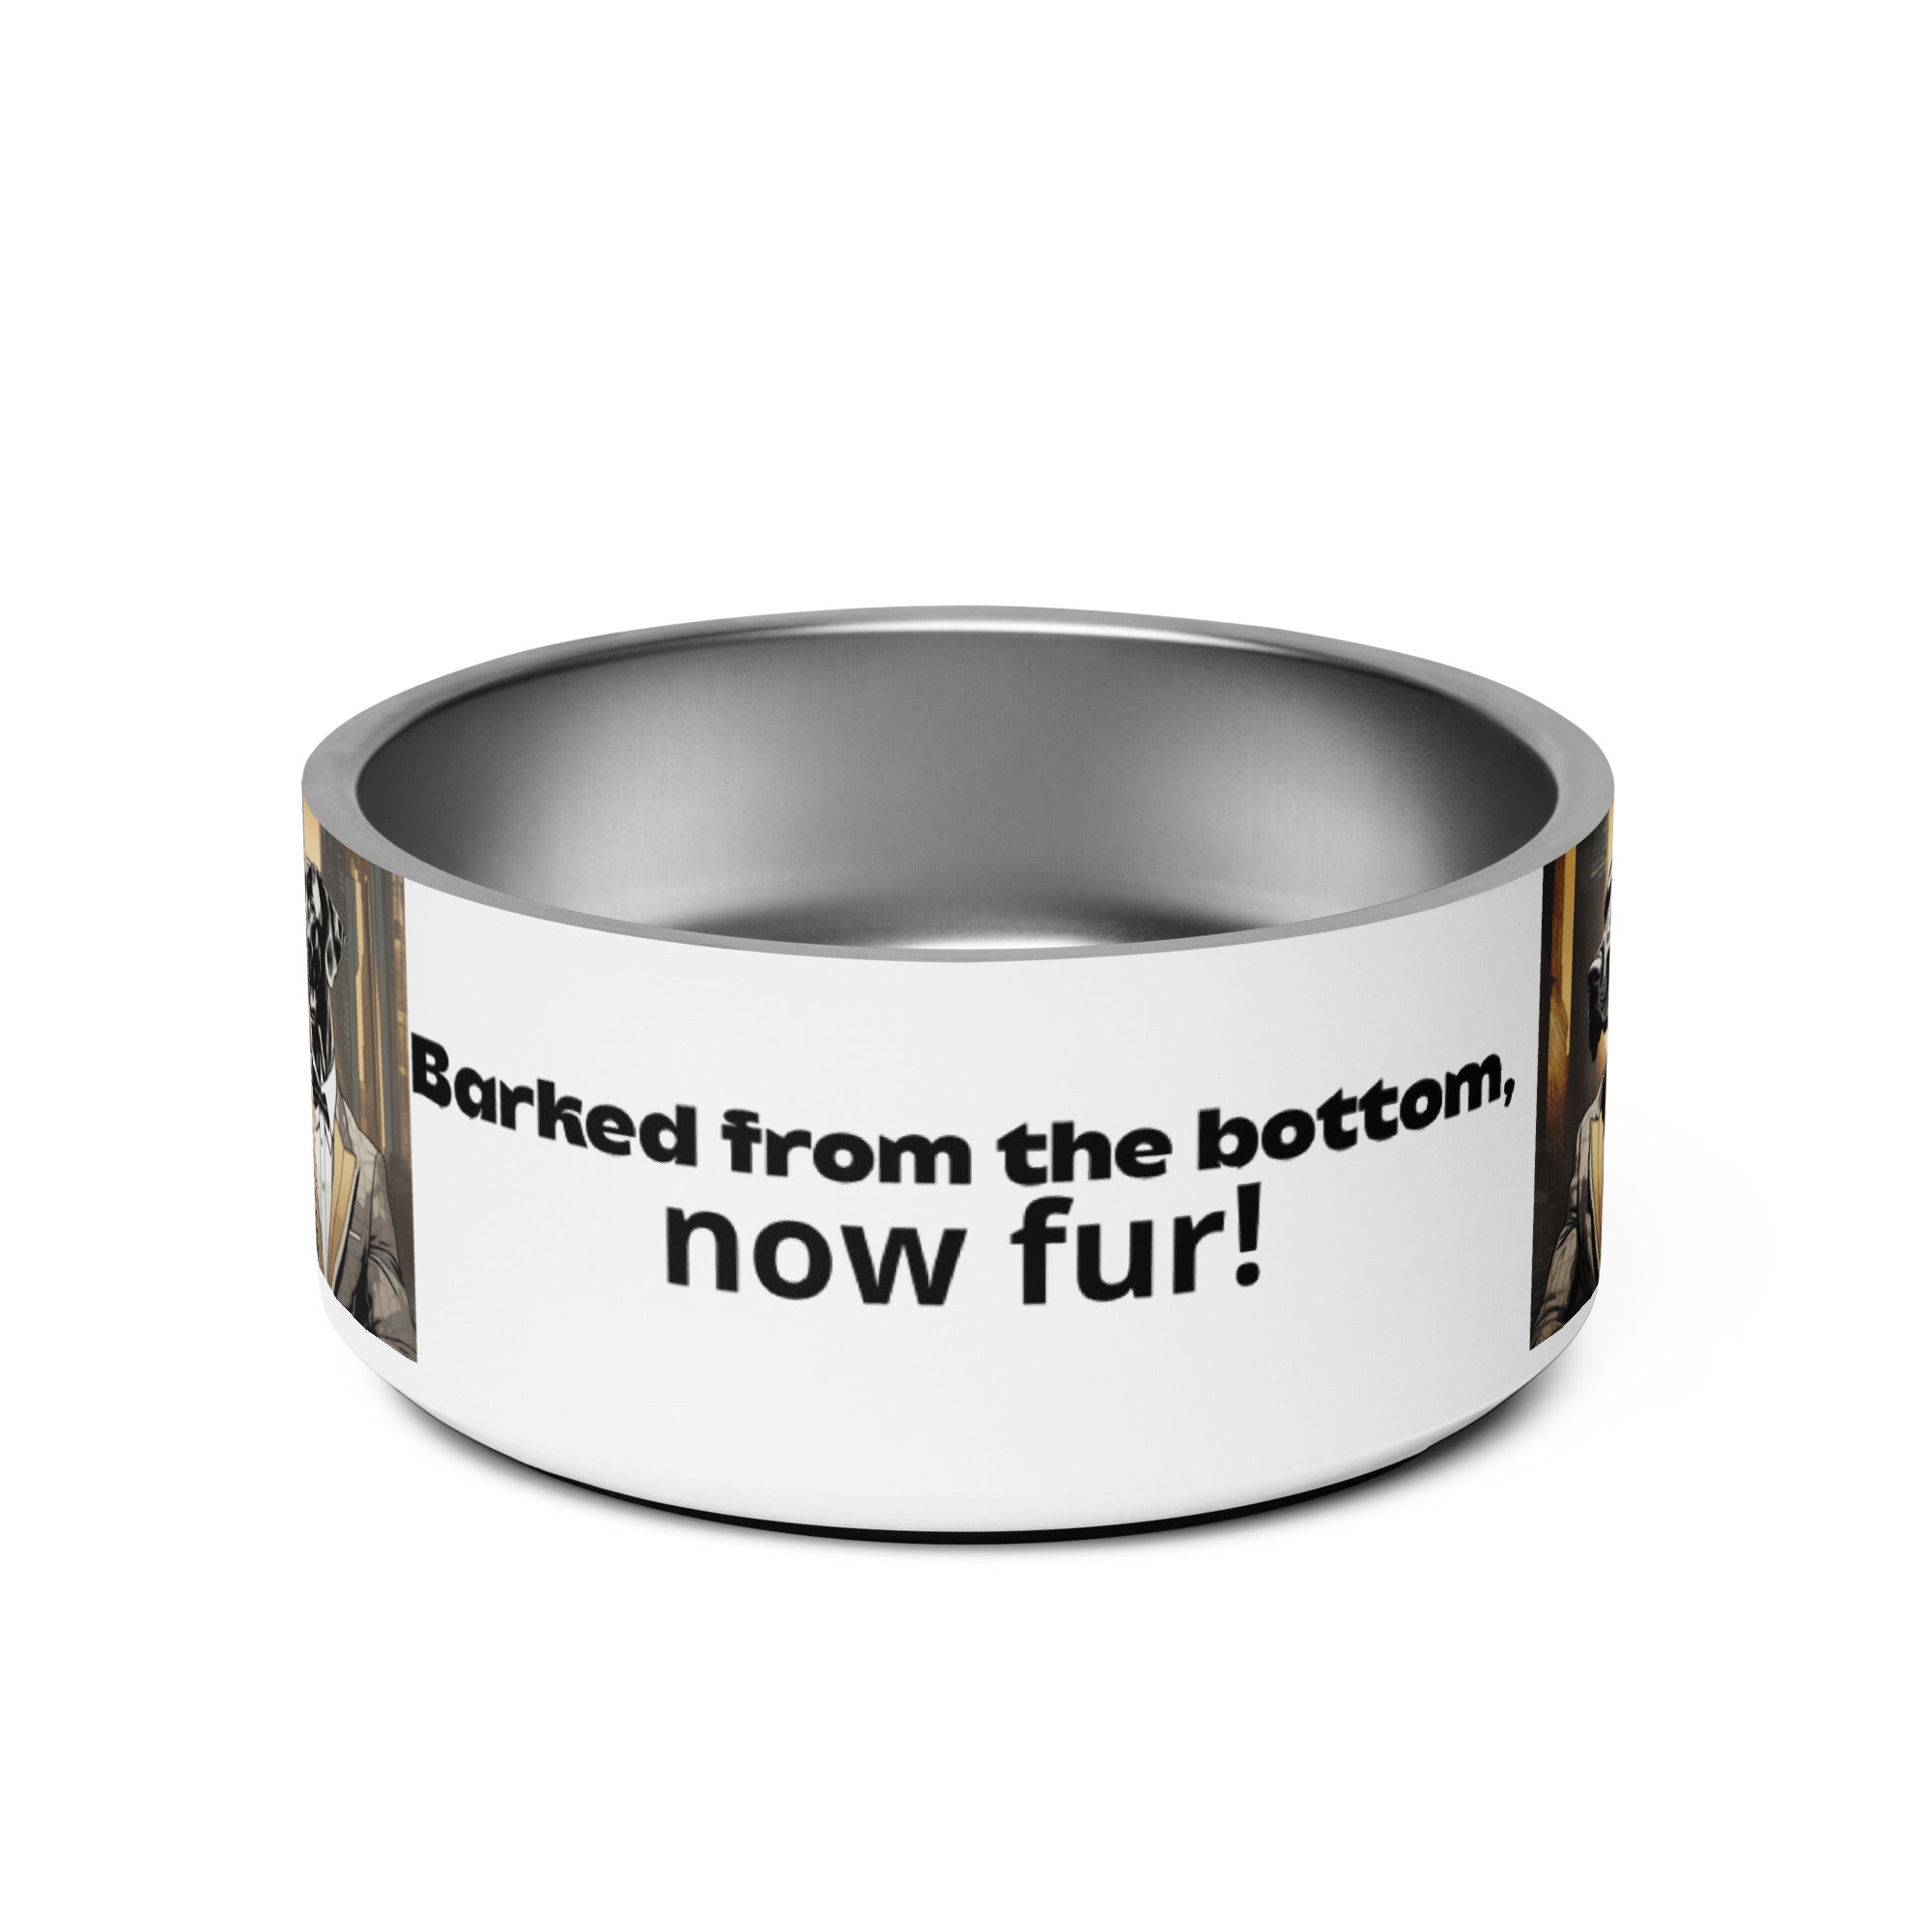 Barked from the bottom, now fur! - Pet bowl